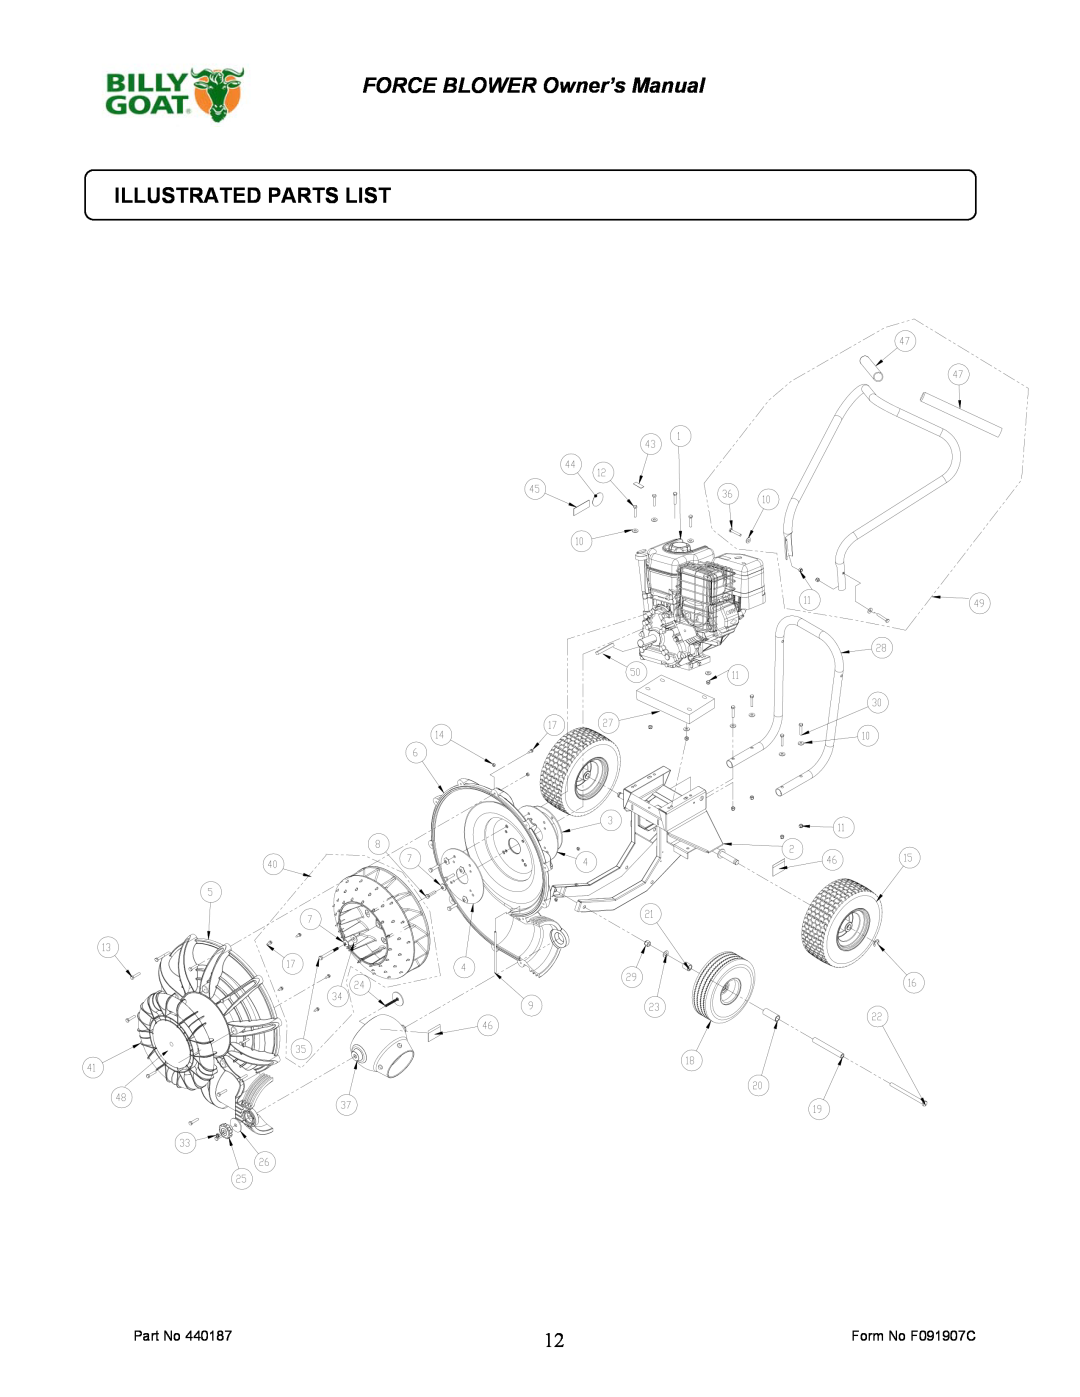 Billy Goat F800 owner manual Illustrated Parts List 